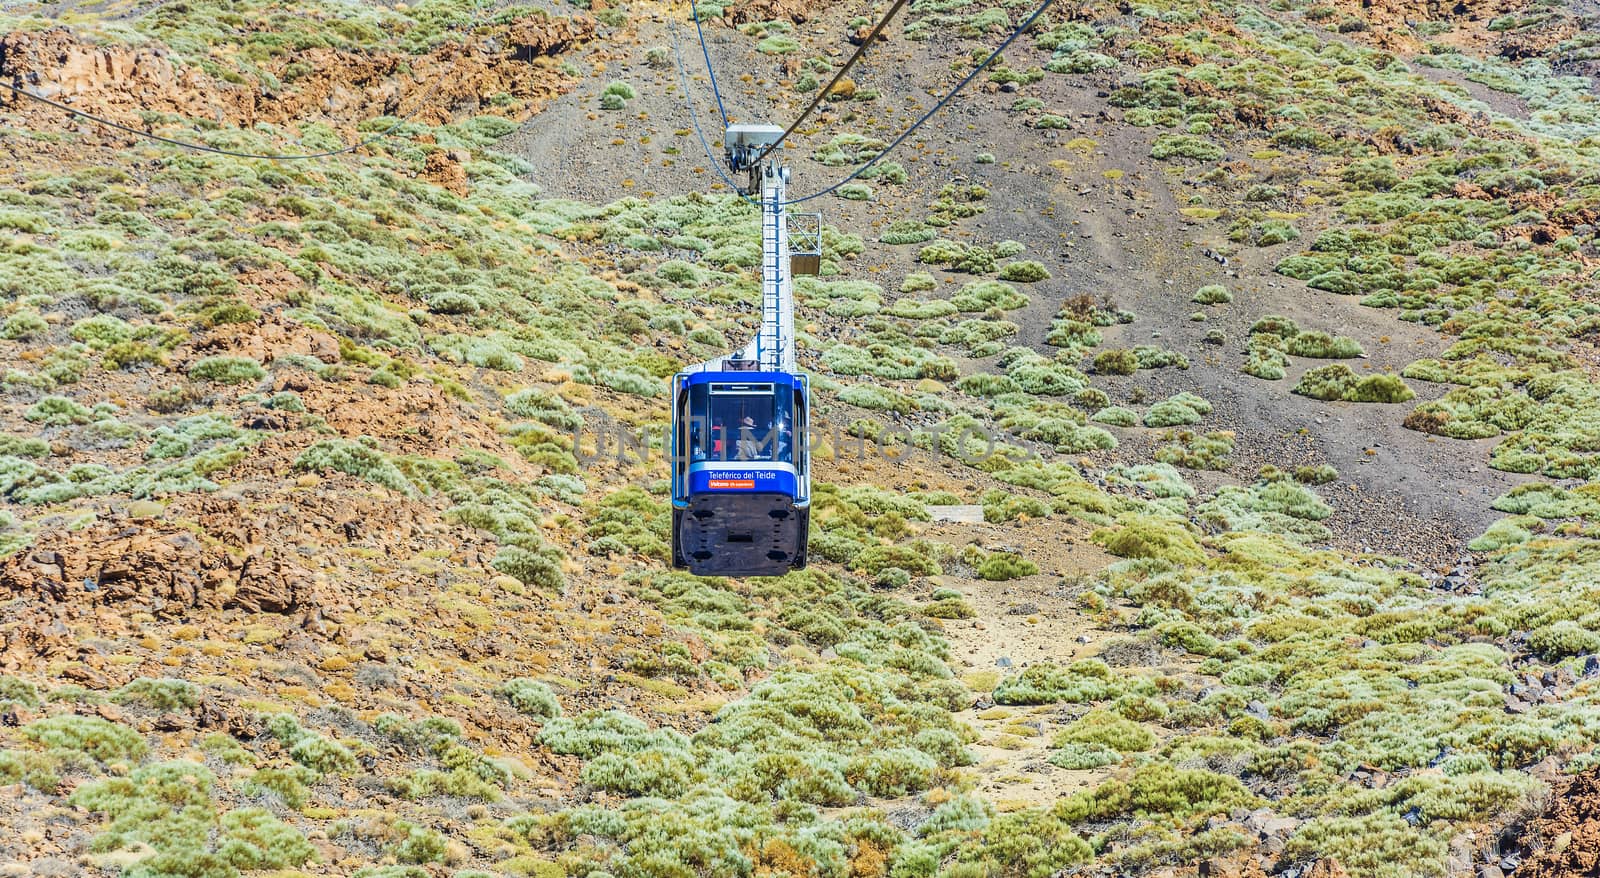 lift Cab picks up tourists at the volcano Teide on Tenerife. by Grommik